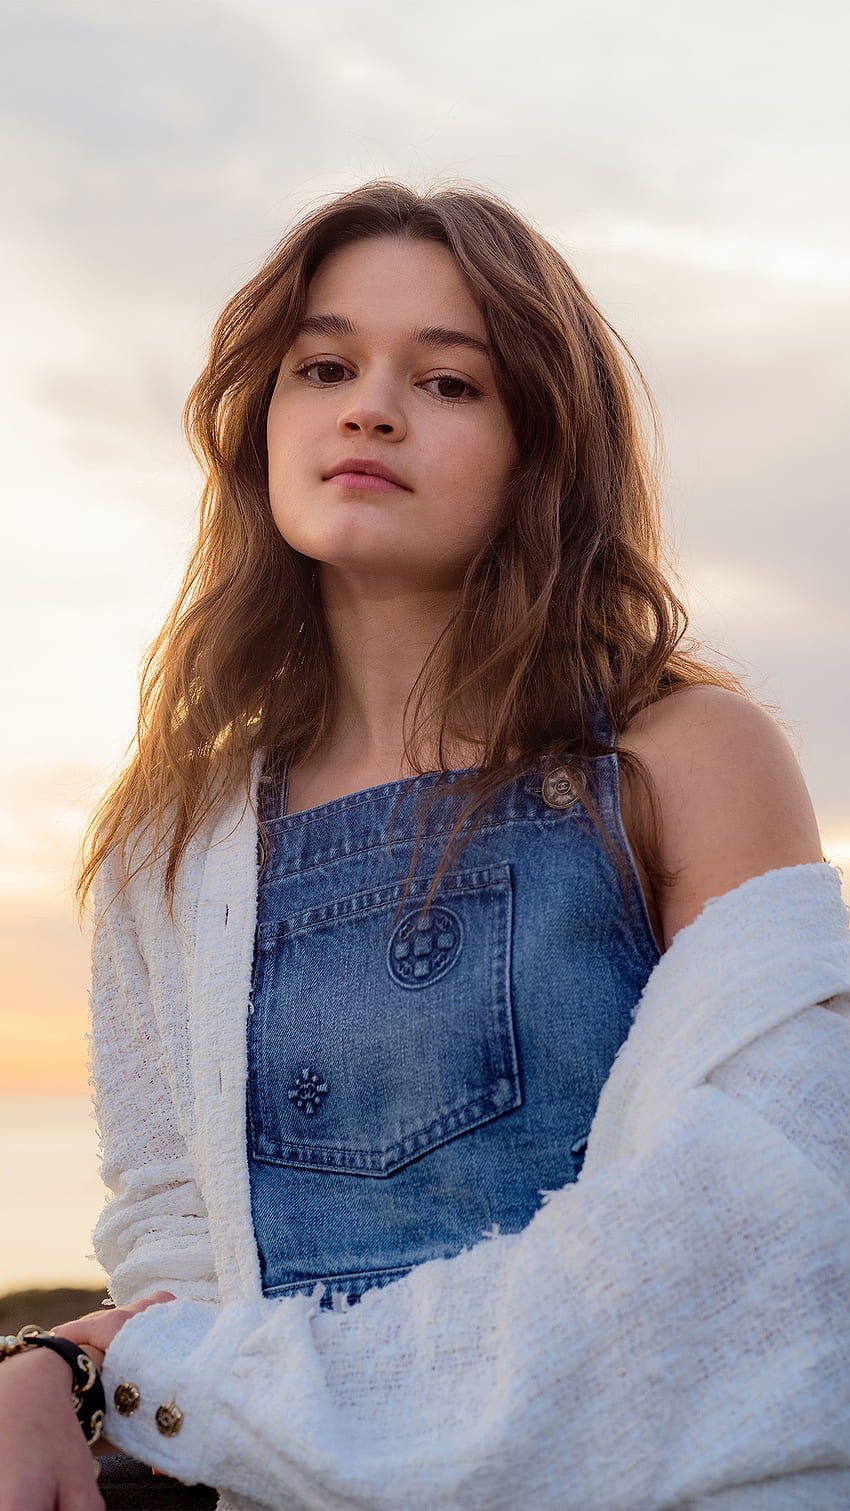 Ciara Bravo hoot For The Face Magazine iPhone 7, 6s, 6 Plus, Pixel xl , One Plus 3, 3t, 5 , , Background, and HD phone wallpaper